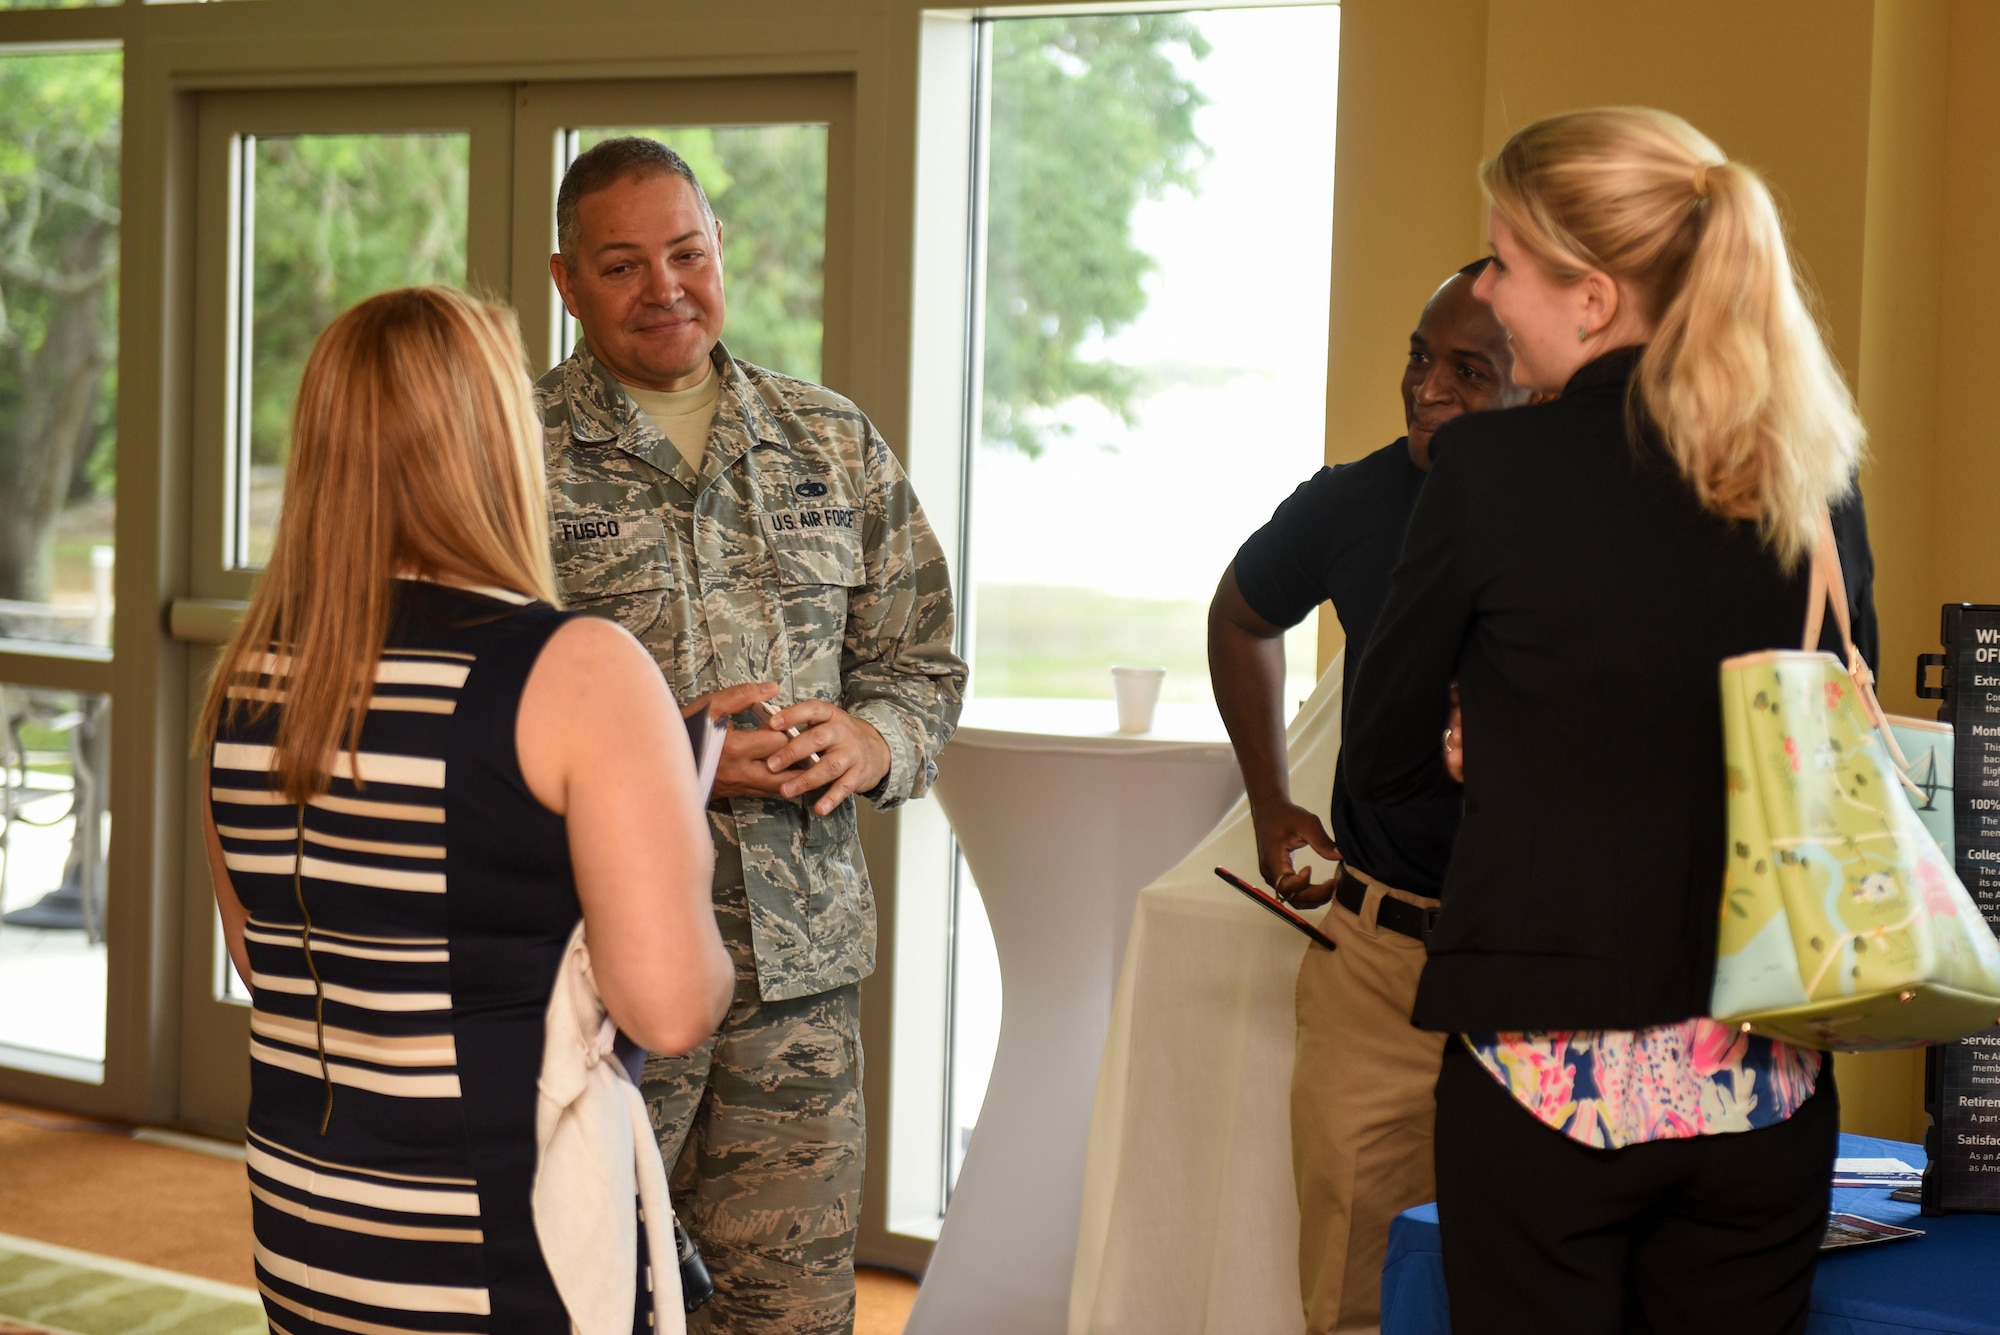 Master Sgt. John Fusco, an in-service recruiter assigned to the 1st Special Operations Force Support Squadron, meets with potential candidates during the 2017 Career Symposium at the Soundside Club, Hurlburt Field, Fla., May 24, 2017. In-service recruiters are career counselors who meet with Airmen separating from active duty and offer opportunities within the Air force Reserves (U.S. Air Force photo by Staff Sgt. Jeff Parkinson)